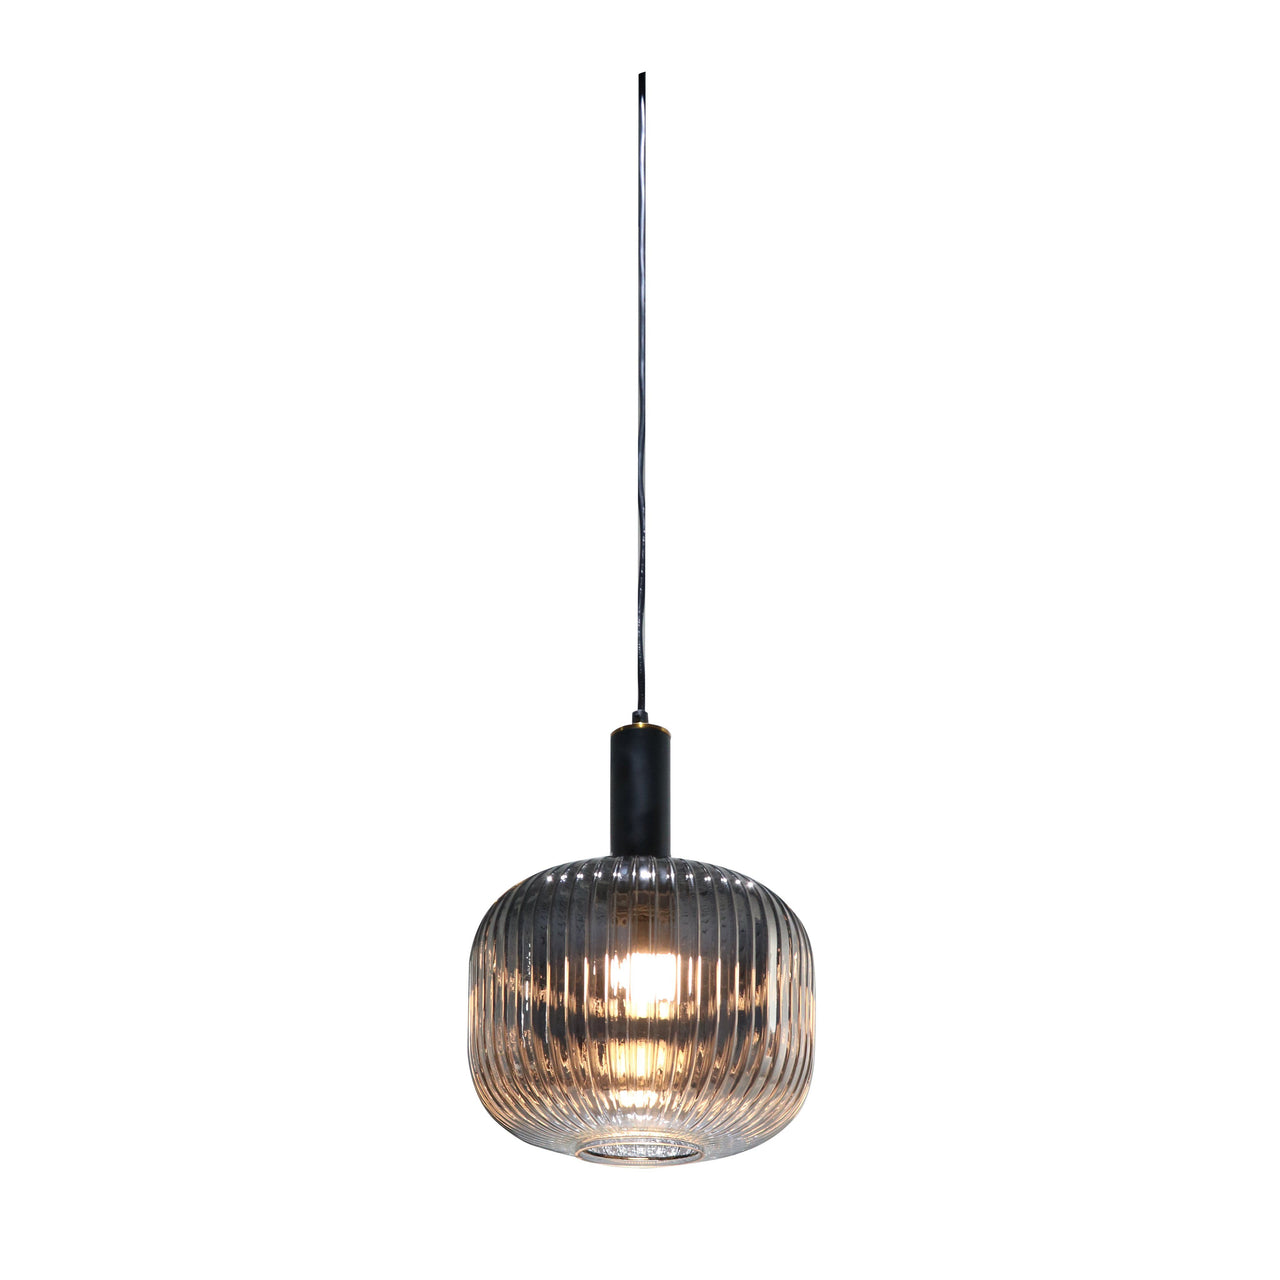 Langley Contemporary Pendant Light Fixture with Grey Glass Shade, Elegant Multi Directional Ceiling Fixture for Living Room, Foyer, or Dining Areas, Dimmable Option Pendant Lighting Canyon Home 